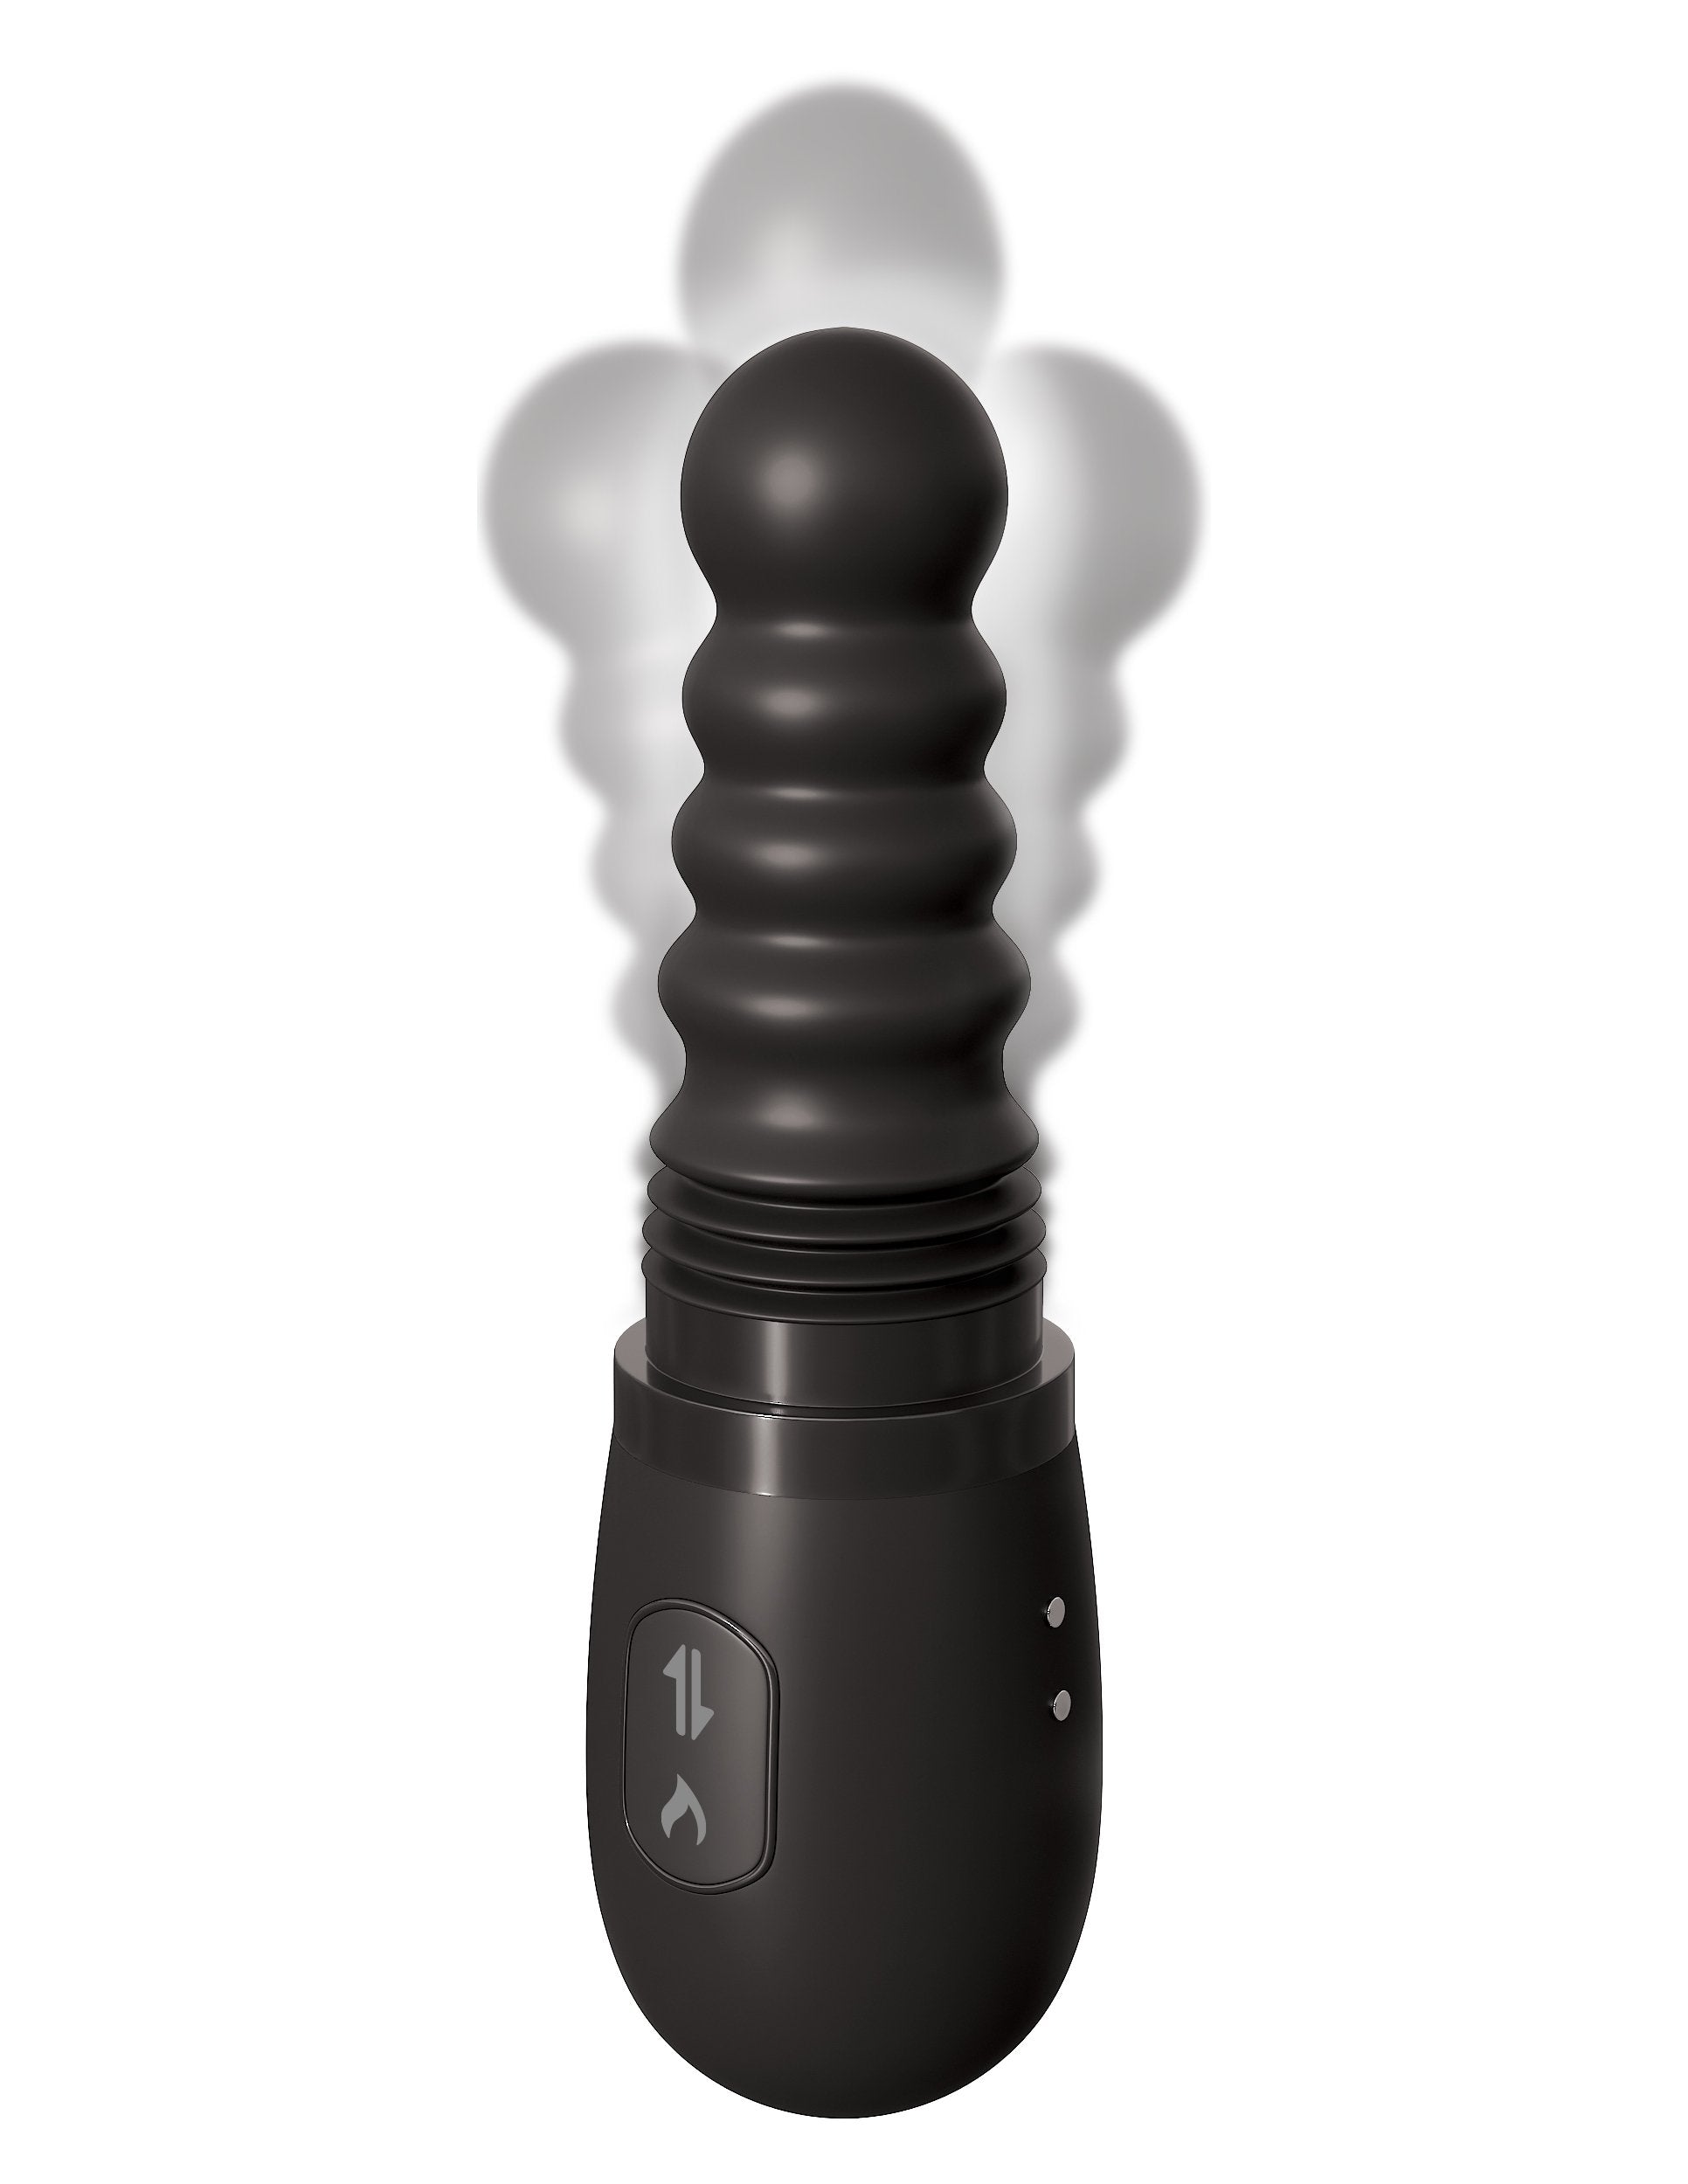 Anal Fantasy Elite Gyrating Warming Silicone Ass Thruster by Pipedream SHOWING the gyrating motion